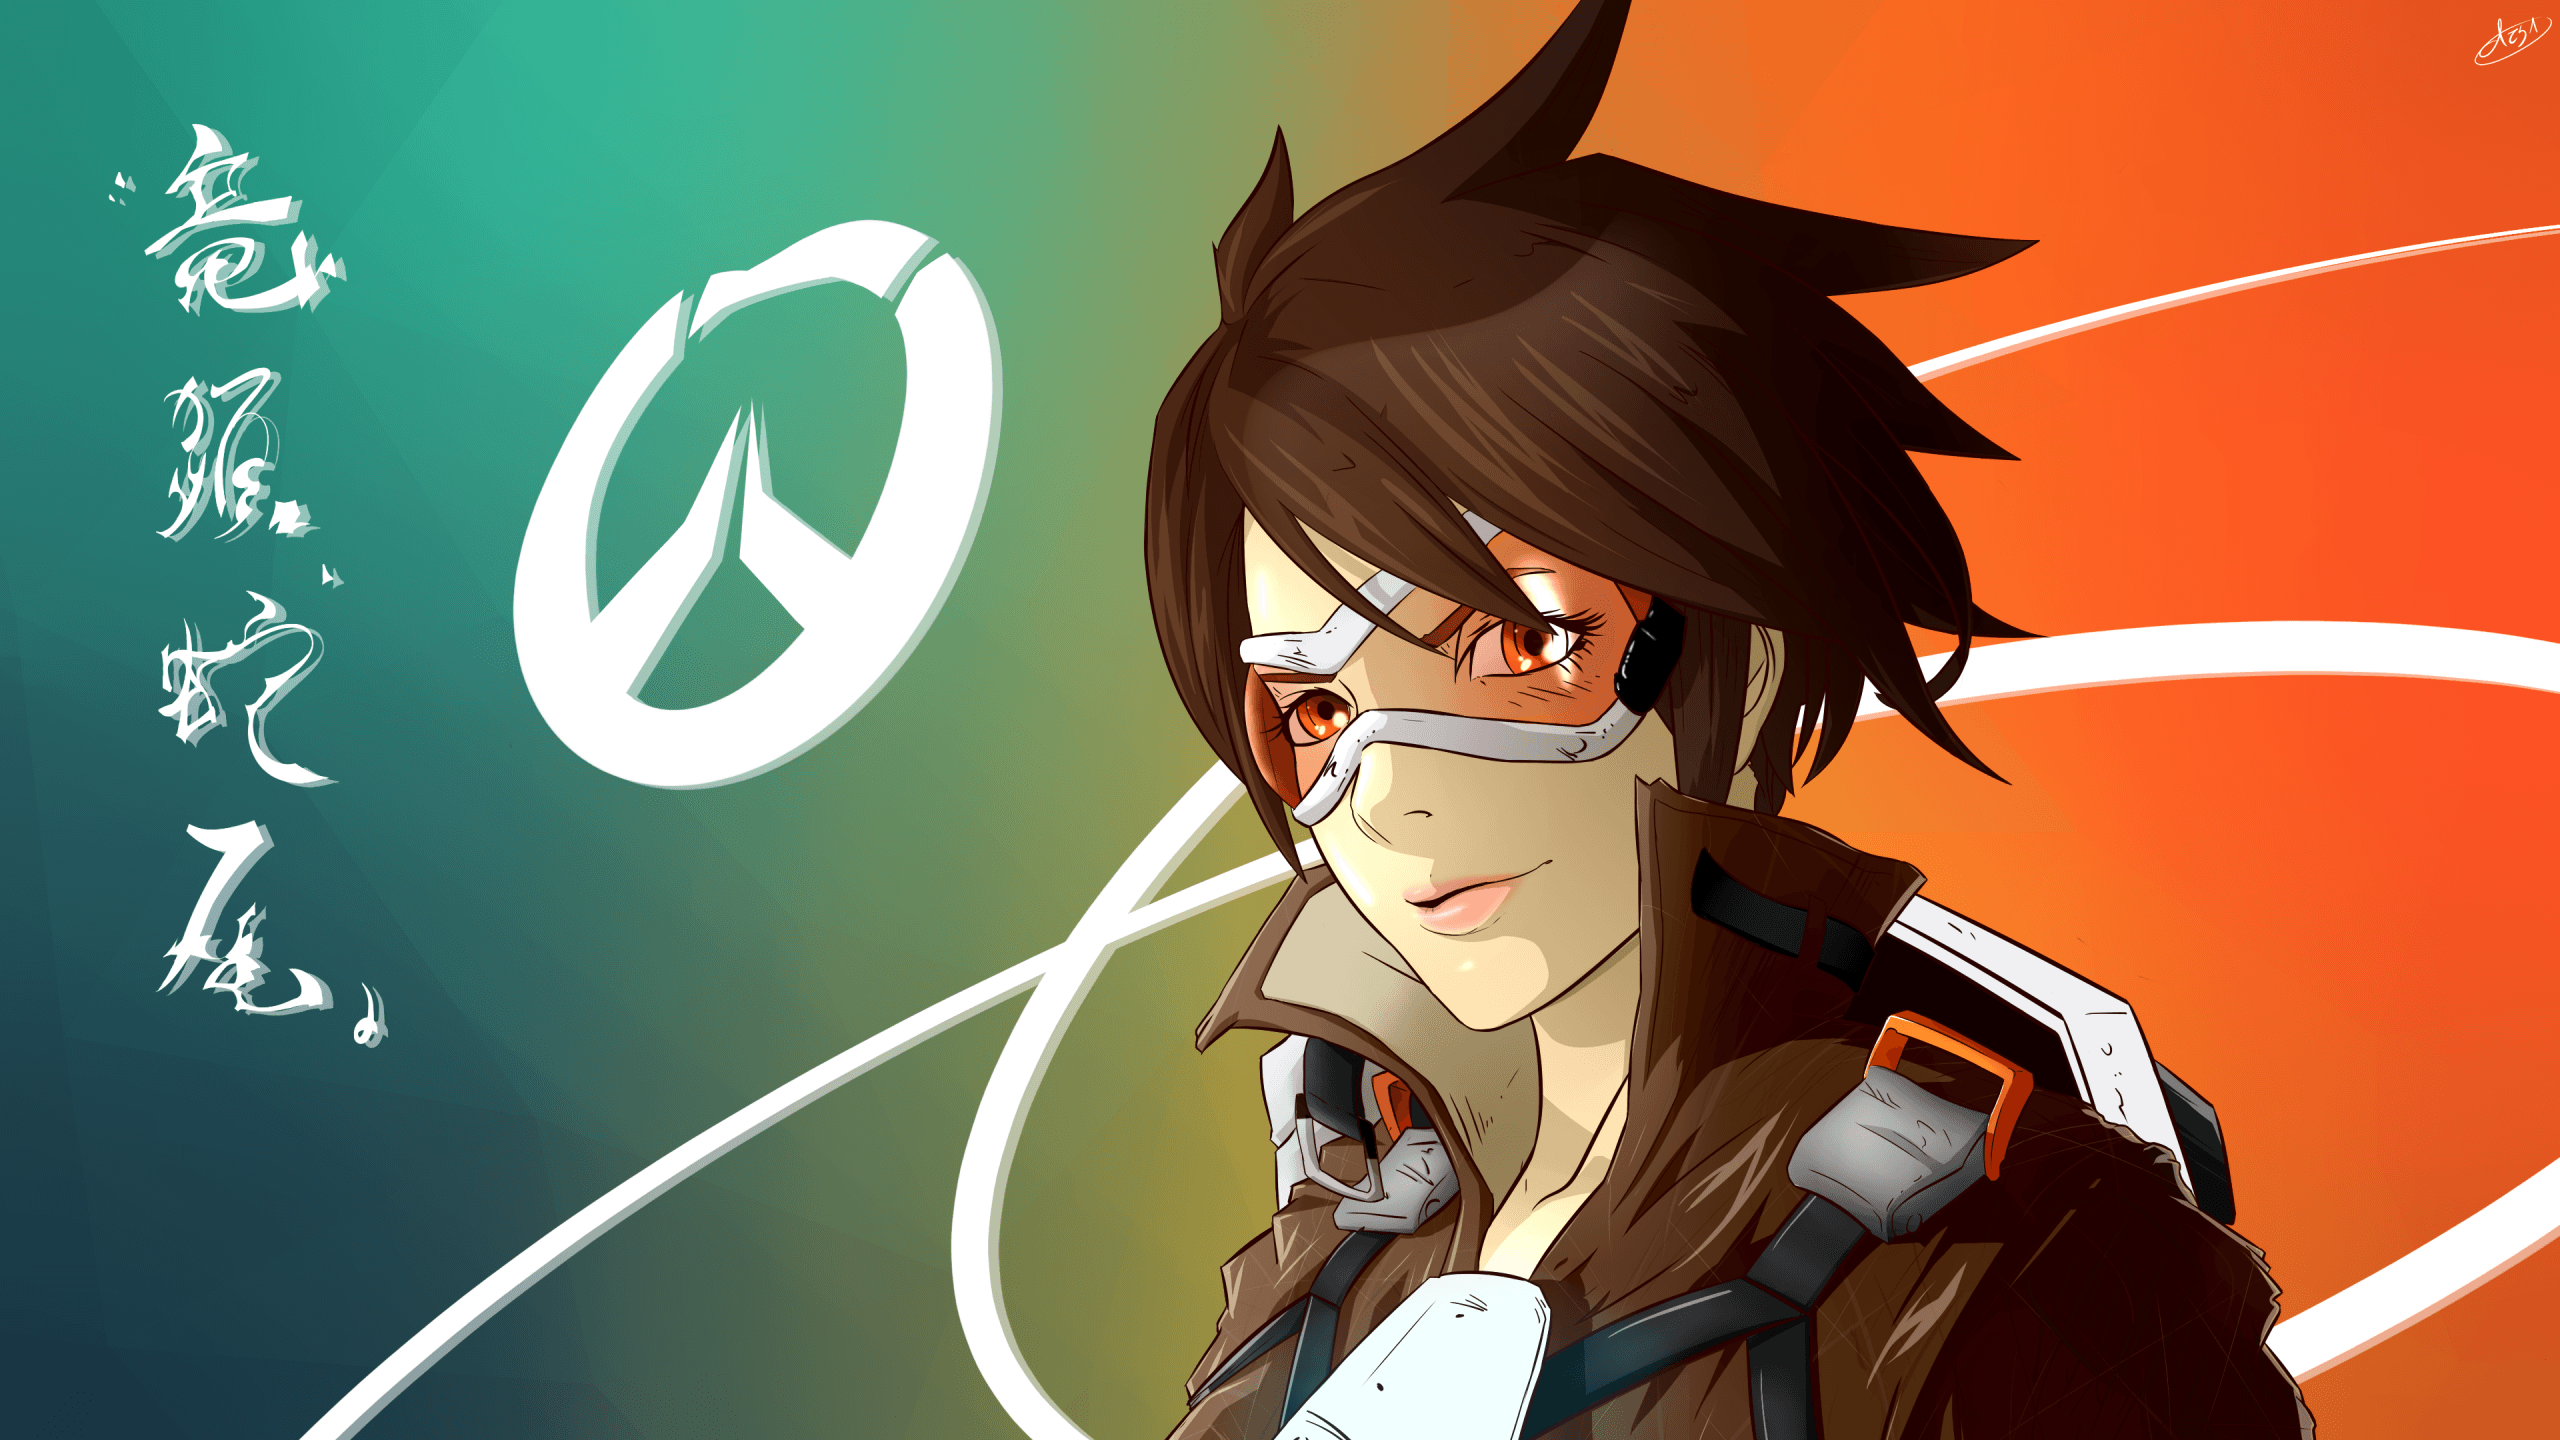 Download 2560x1440 Overwatch, Tracer Wallpaper for iMac 27 inch